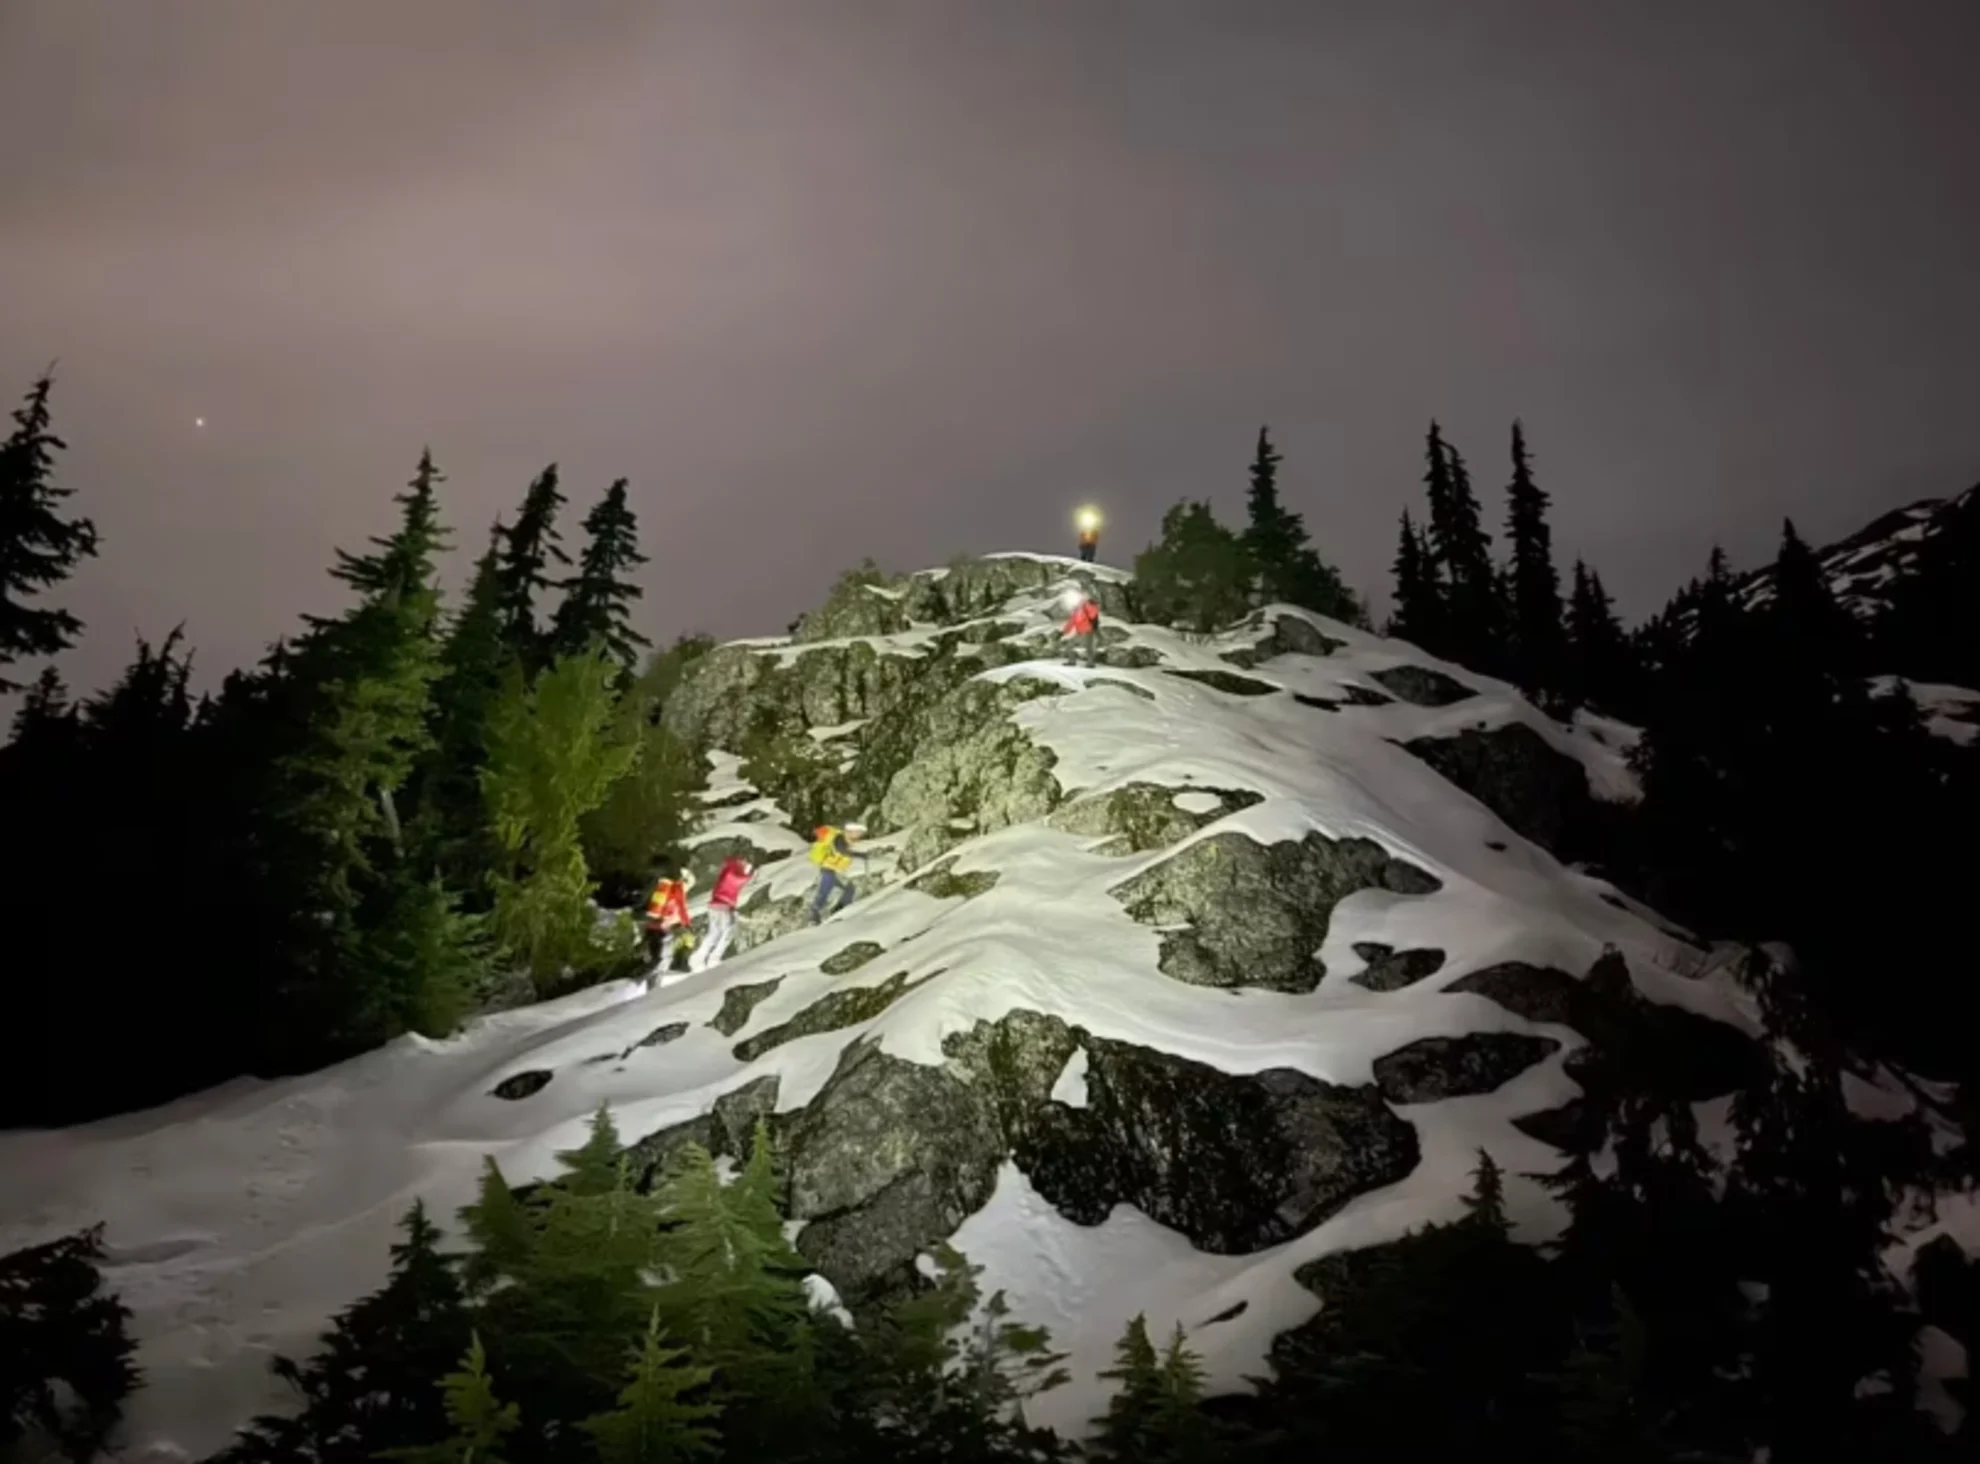 Hiker rescued after 9 hours stranded in gully on Mt. Seymour